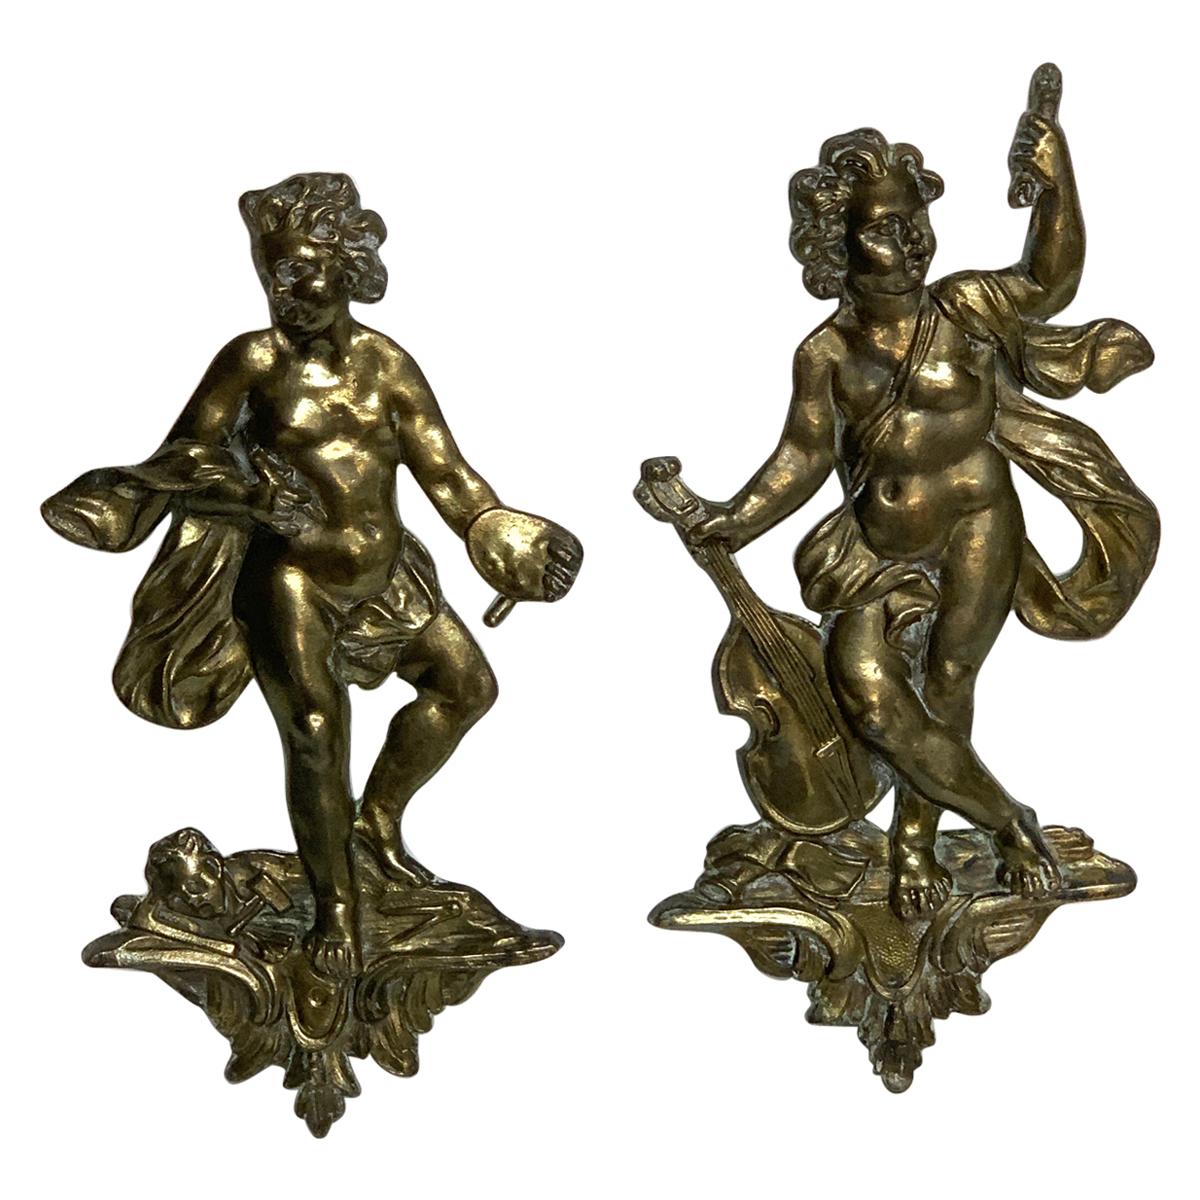 Pair of Antique French Bronze Appliqués Depicting Art and Music